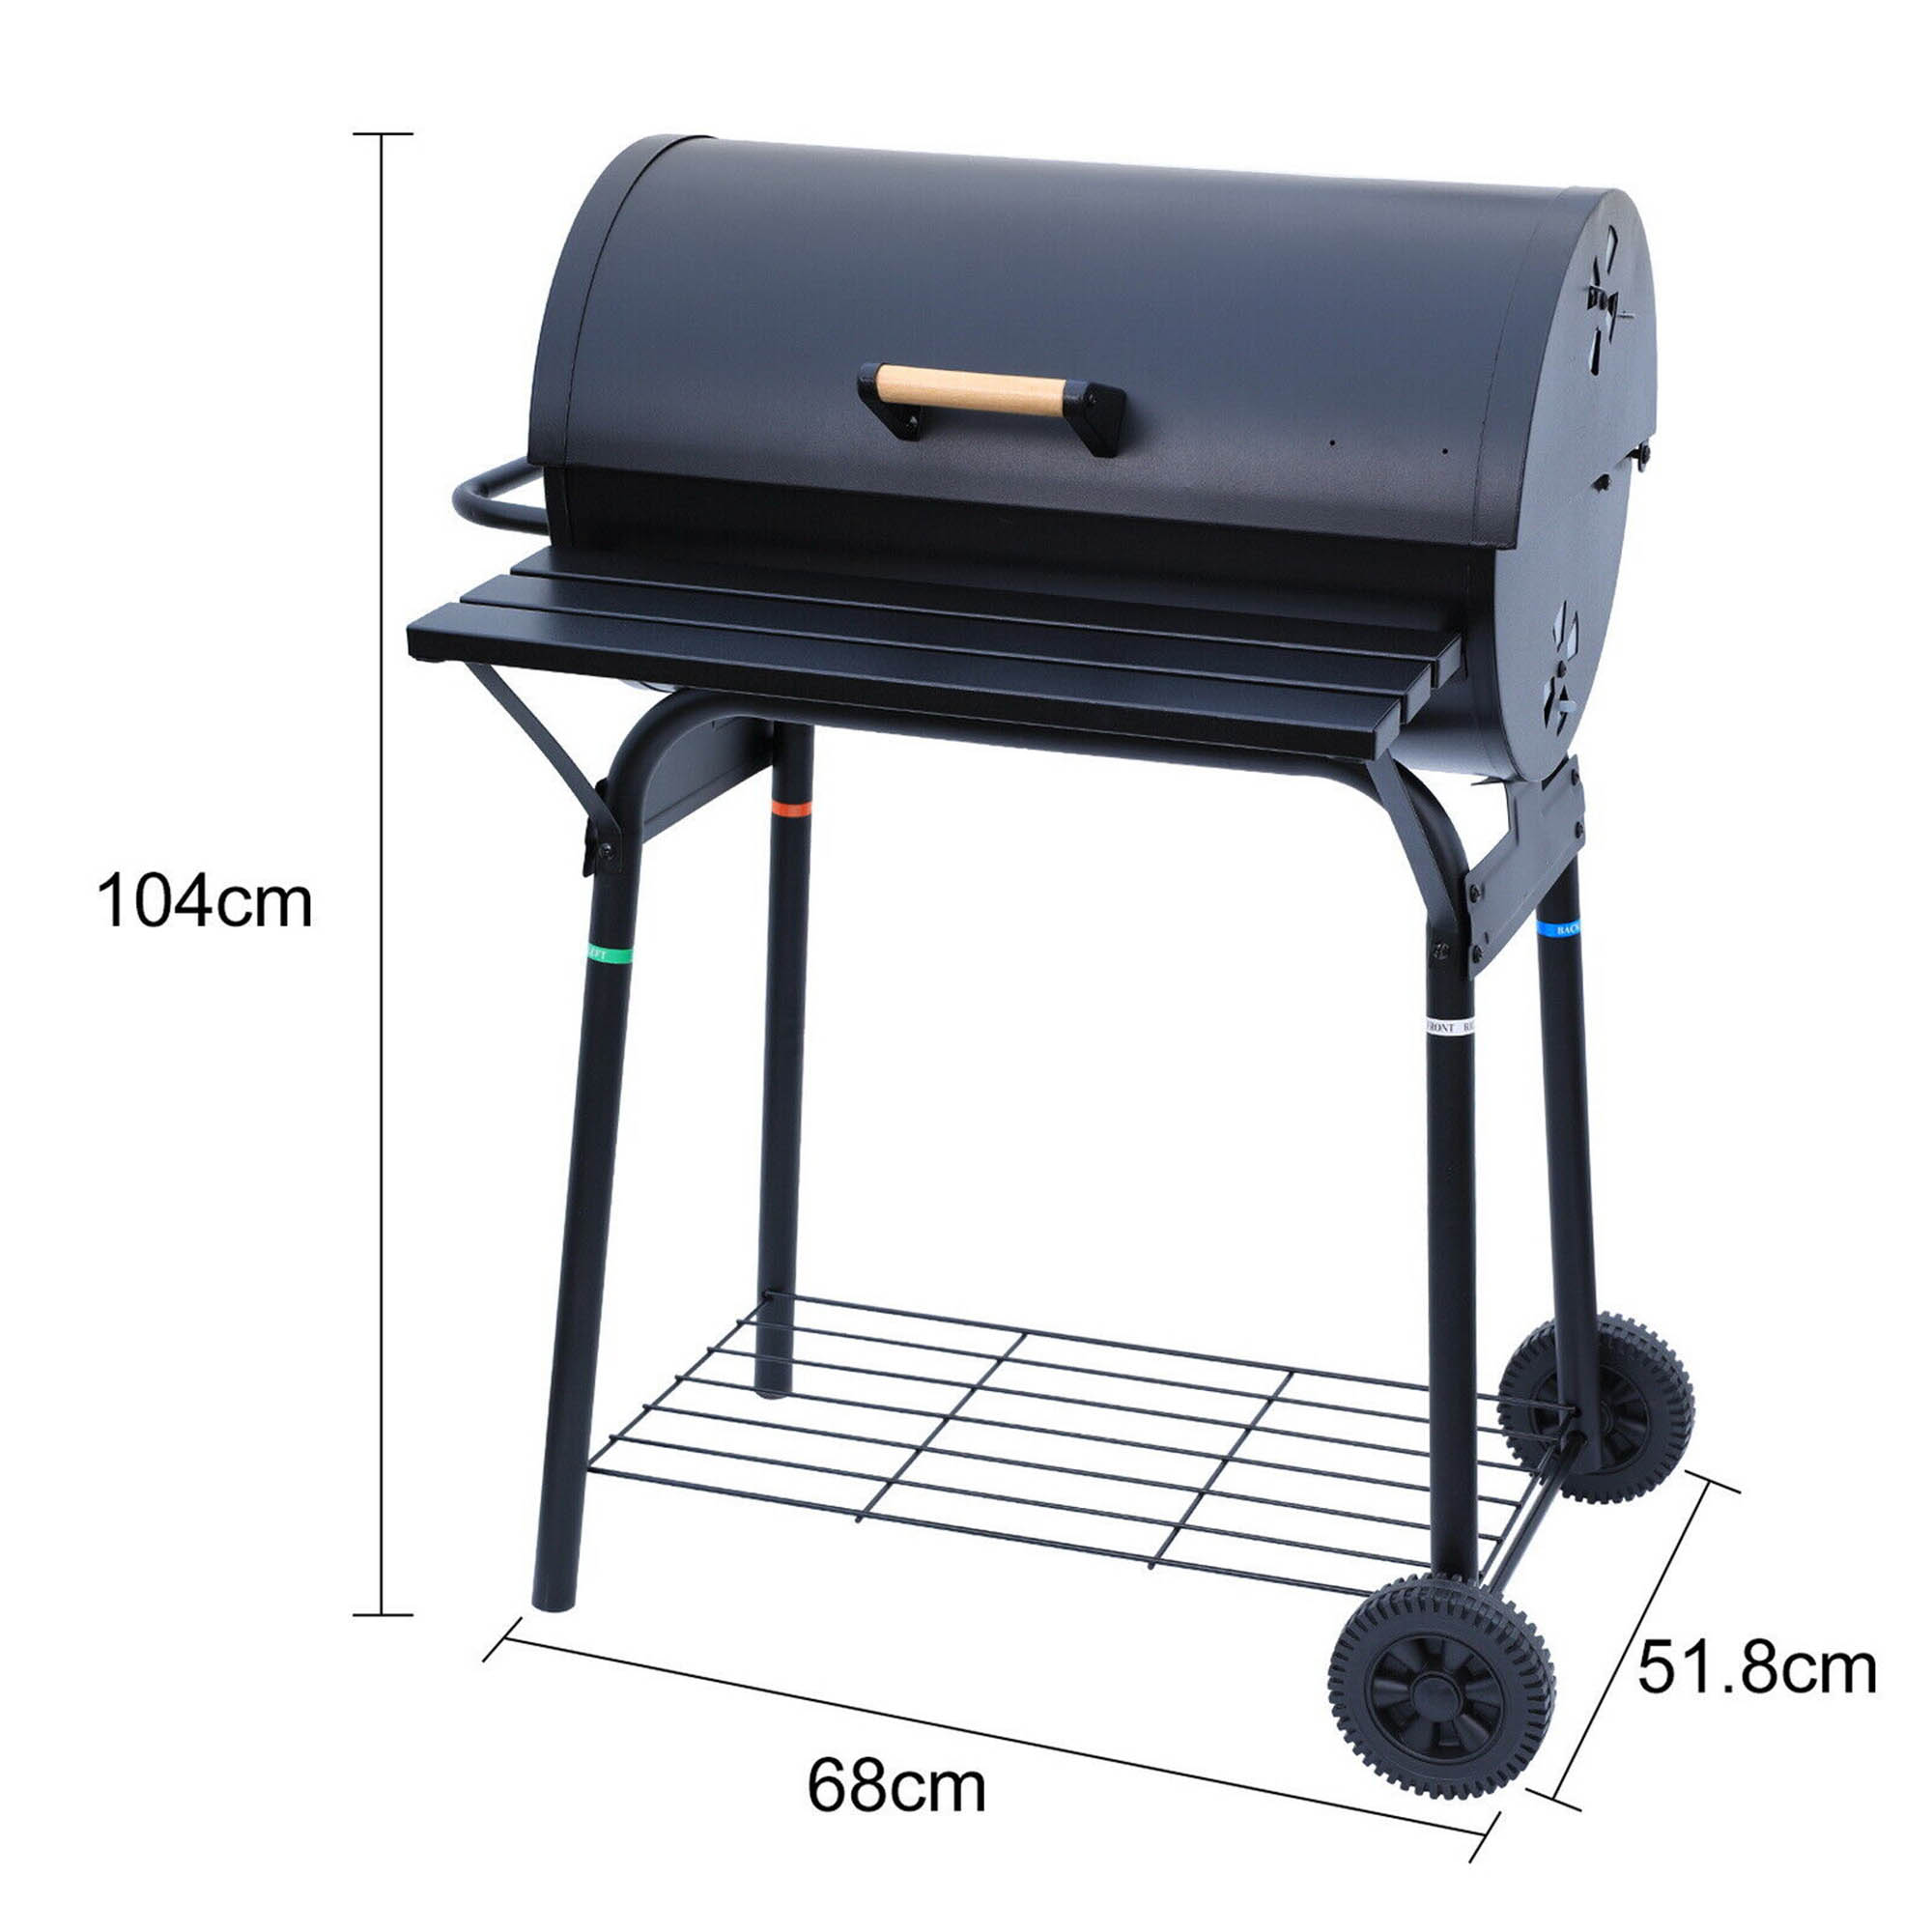 SHCKE Portable Charcole Grill Folding Charcoal Camping Barbecue Oven Heavy Duty Charcoal Barrel BBQ Grill, Outdoor Cooking for Outdoor Backyard, Patio and Parties - image 5 of 8